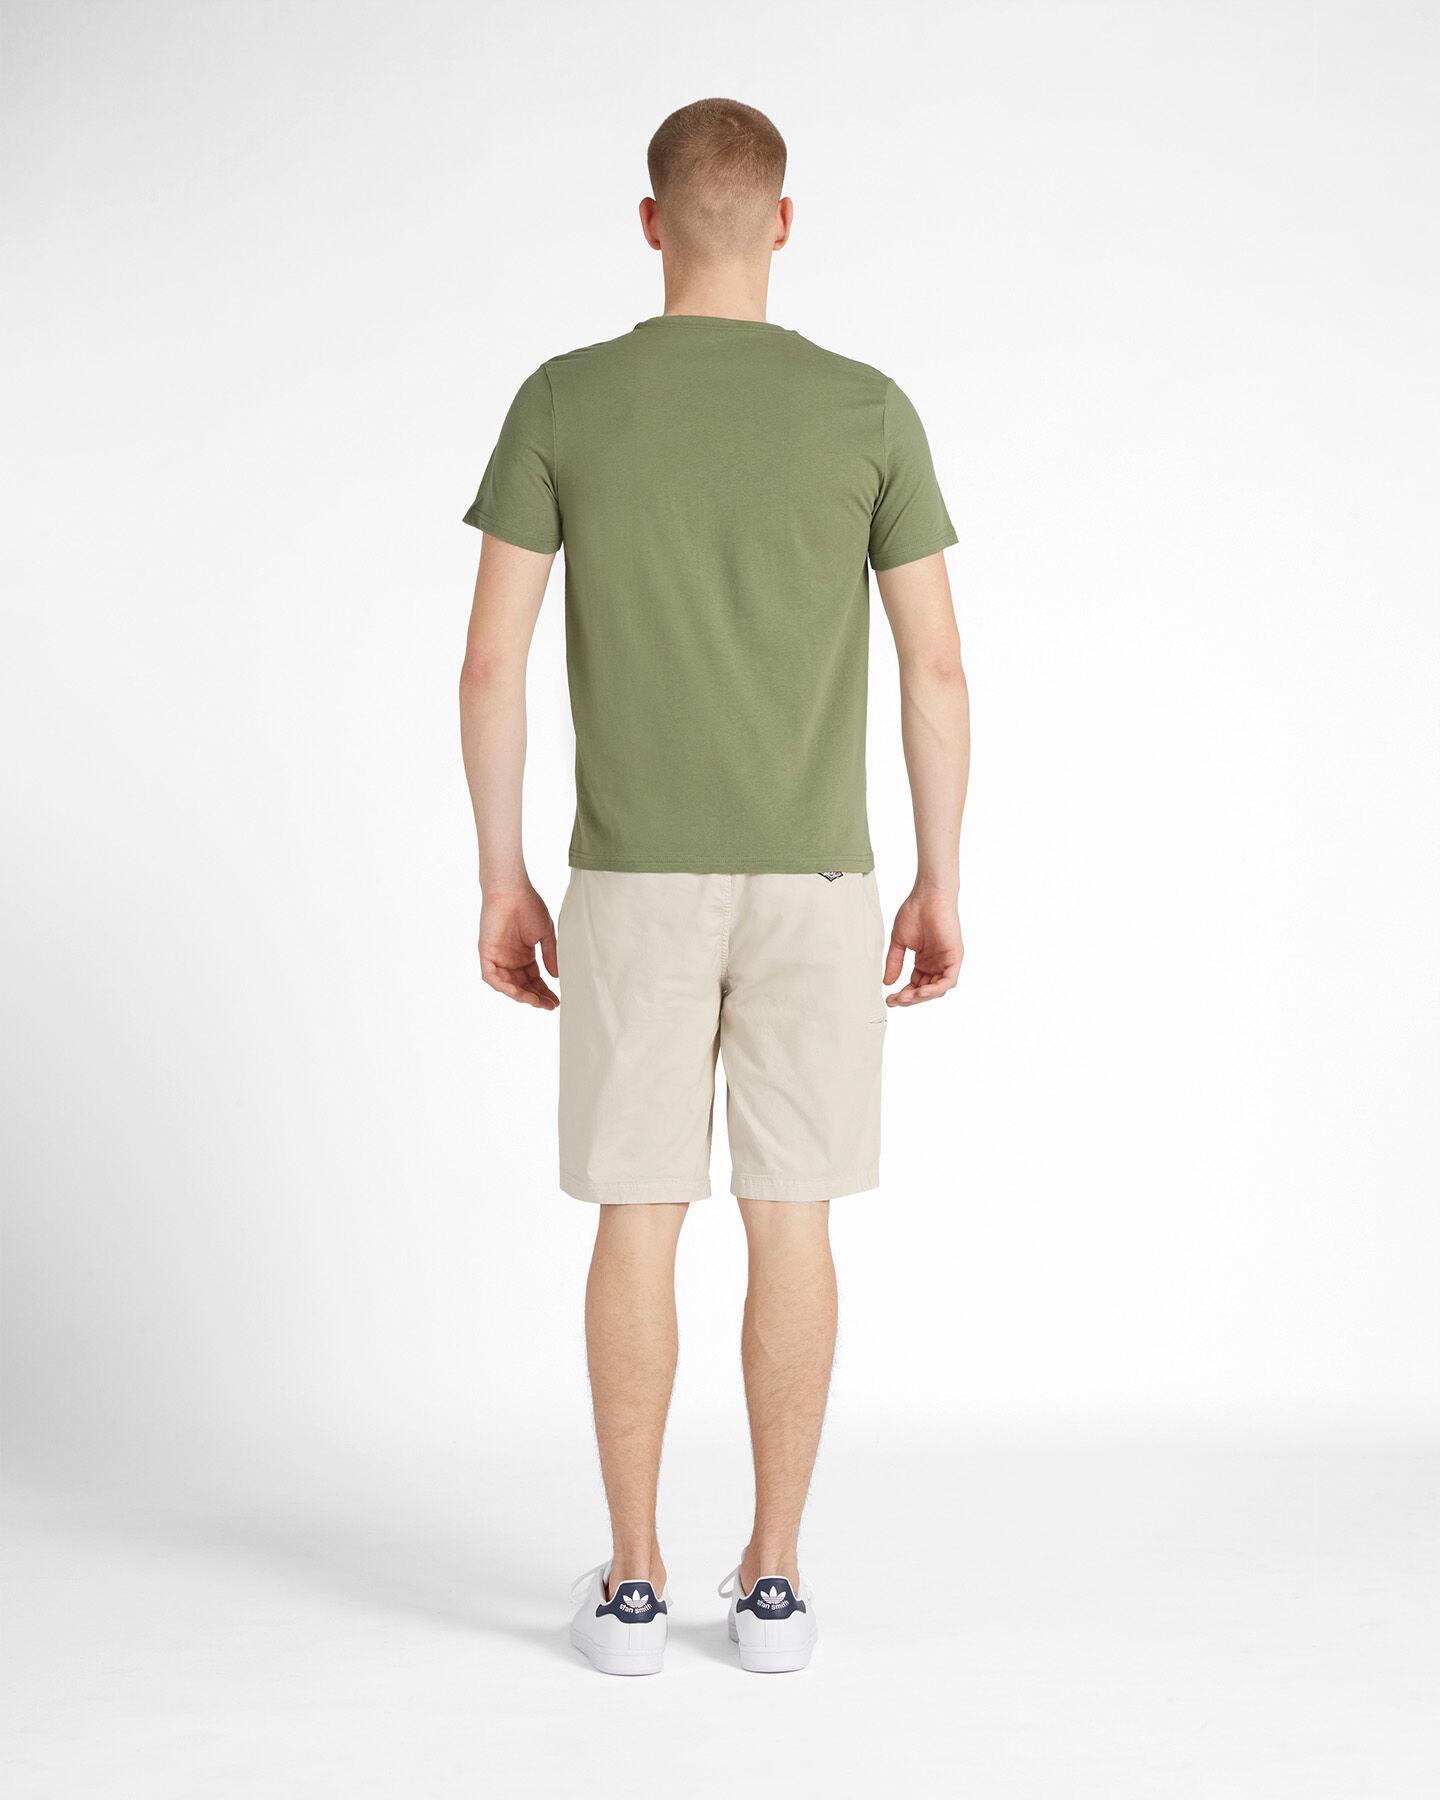  T-Shirt DACK'S BASIC COLLECTION M S4118350|838|S scatto 2